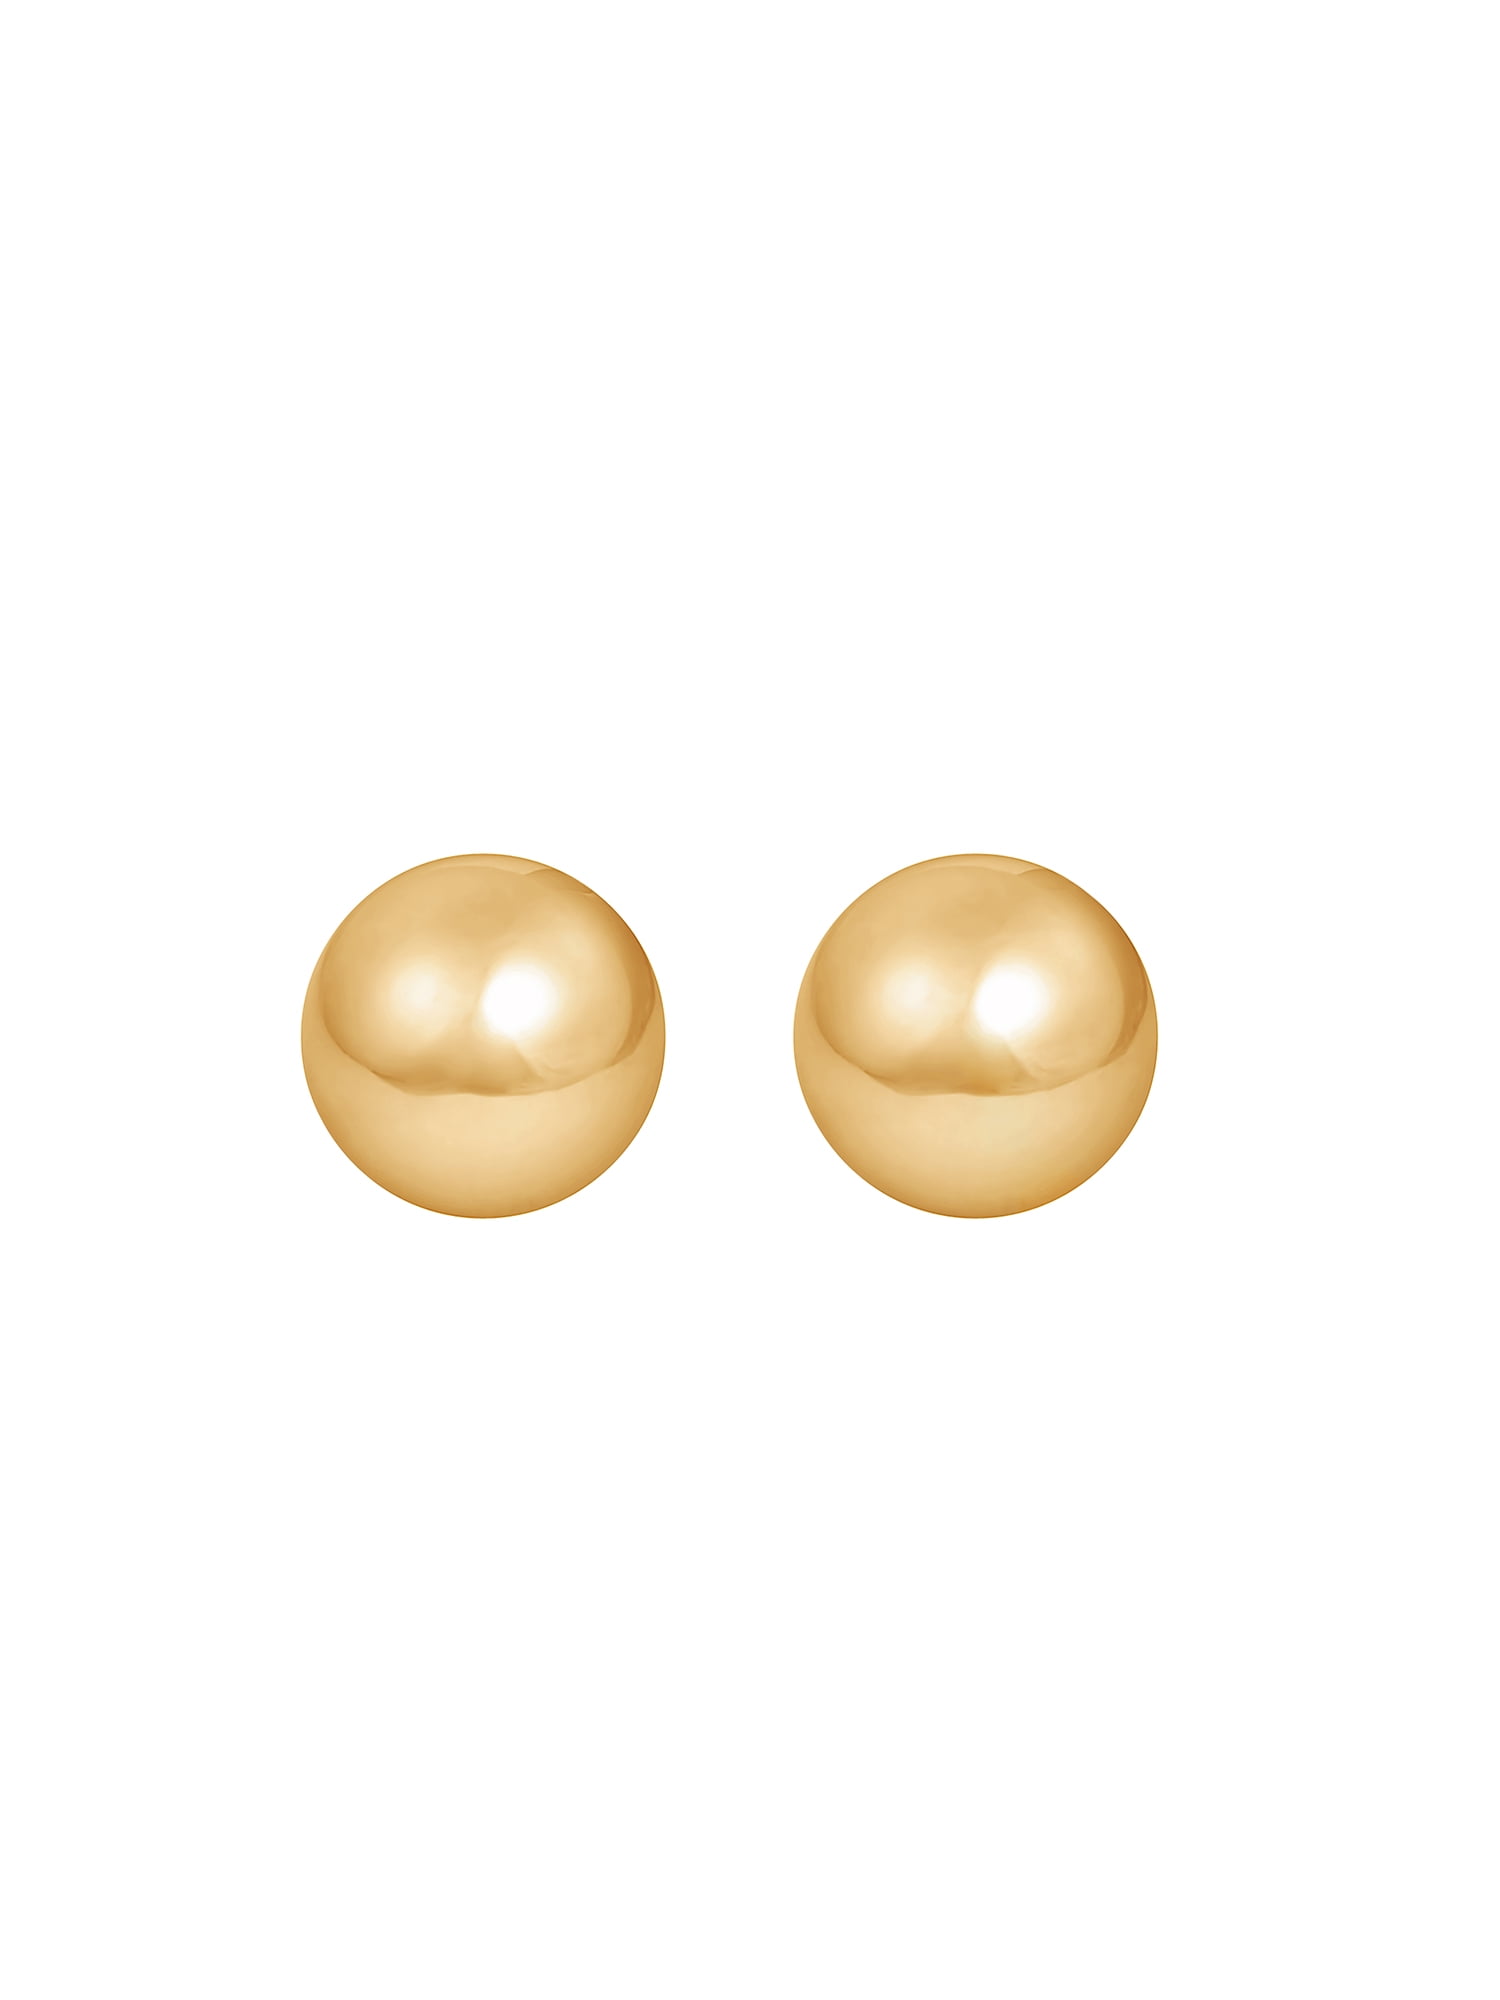 Details about   10K Real Yellow Gold 6mm Ball Post Stud Earrings E4050 10K Oro Real Aretes 